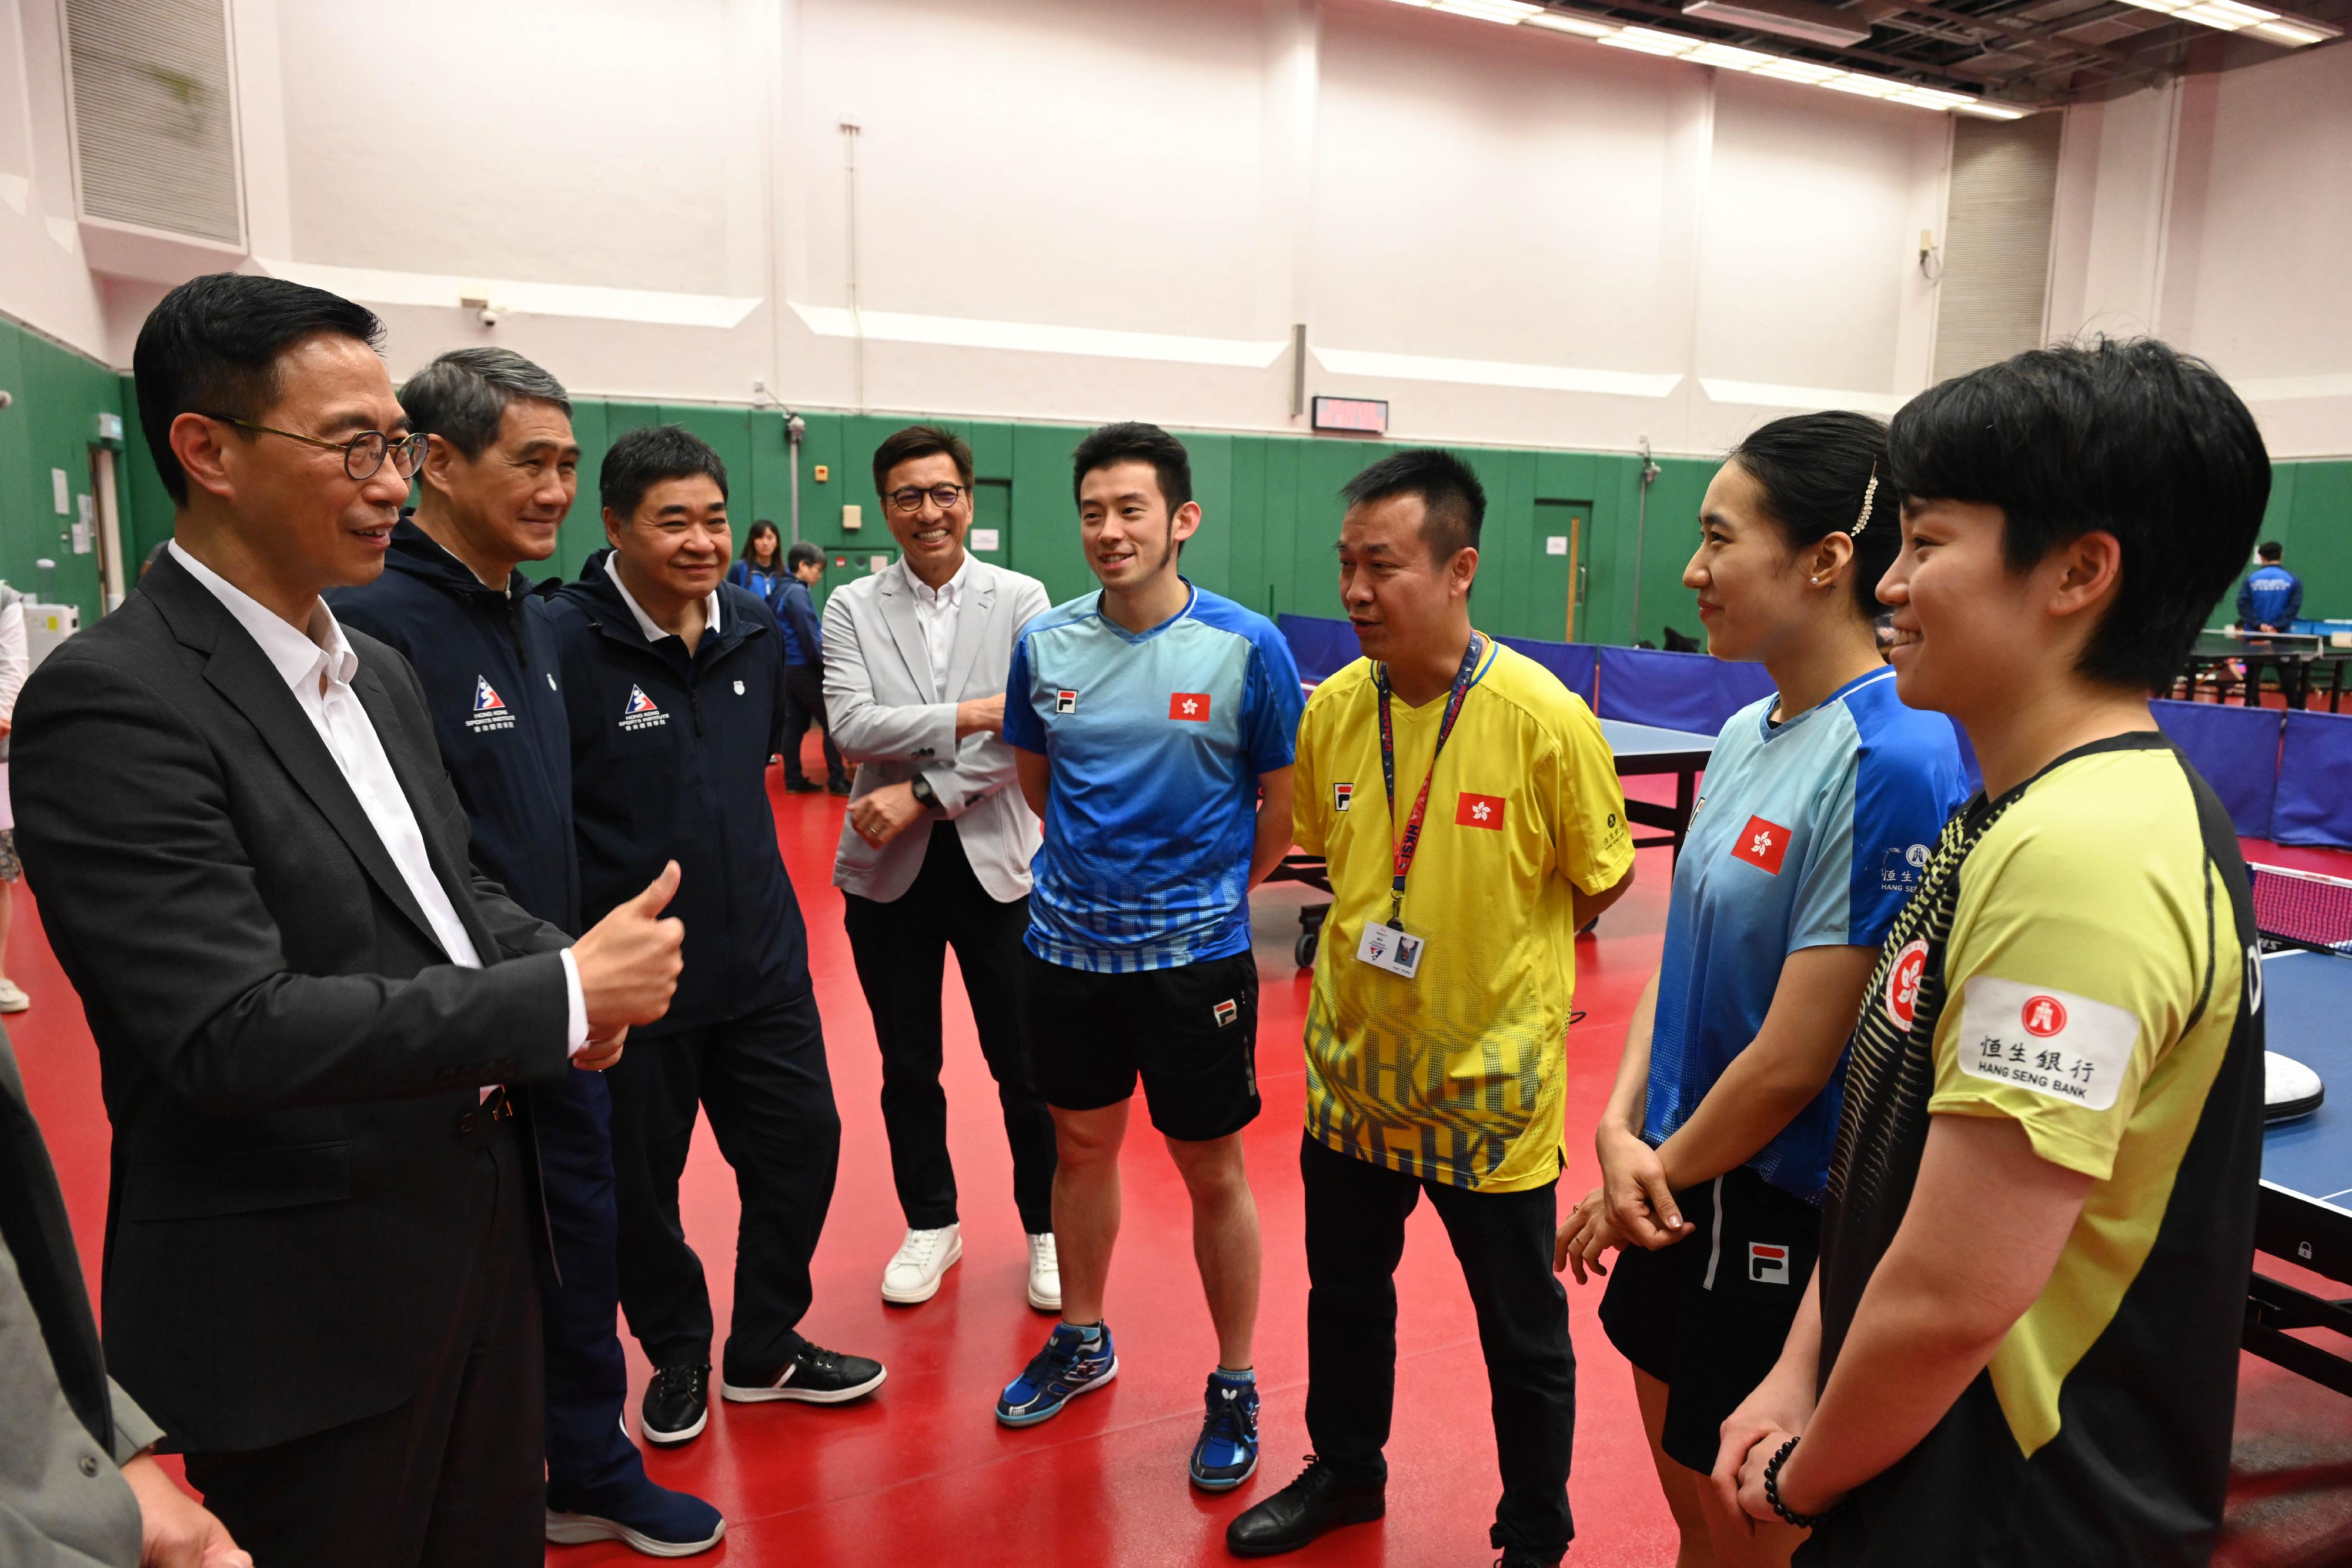 The Secretary for Culture, Sports and Tourism, Mr Kevin Yeung (first left), and the Commissioner for Sports, Mr Sam Wong (fourth left), this afternoon (May 27) visit the table tennis hall in the Hong Kong Sports Institute to exchange with the table tennis athletes.